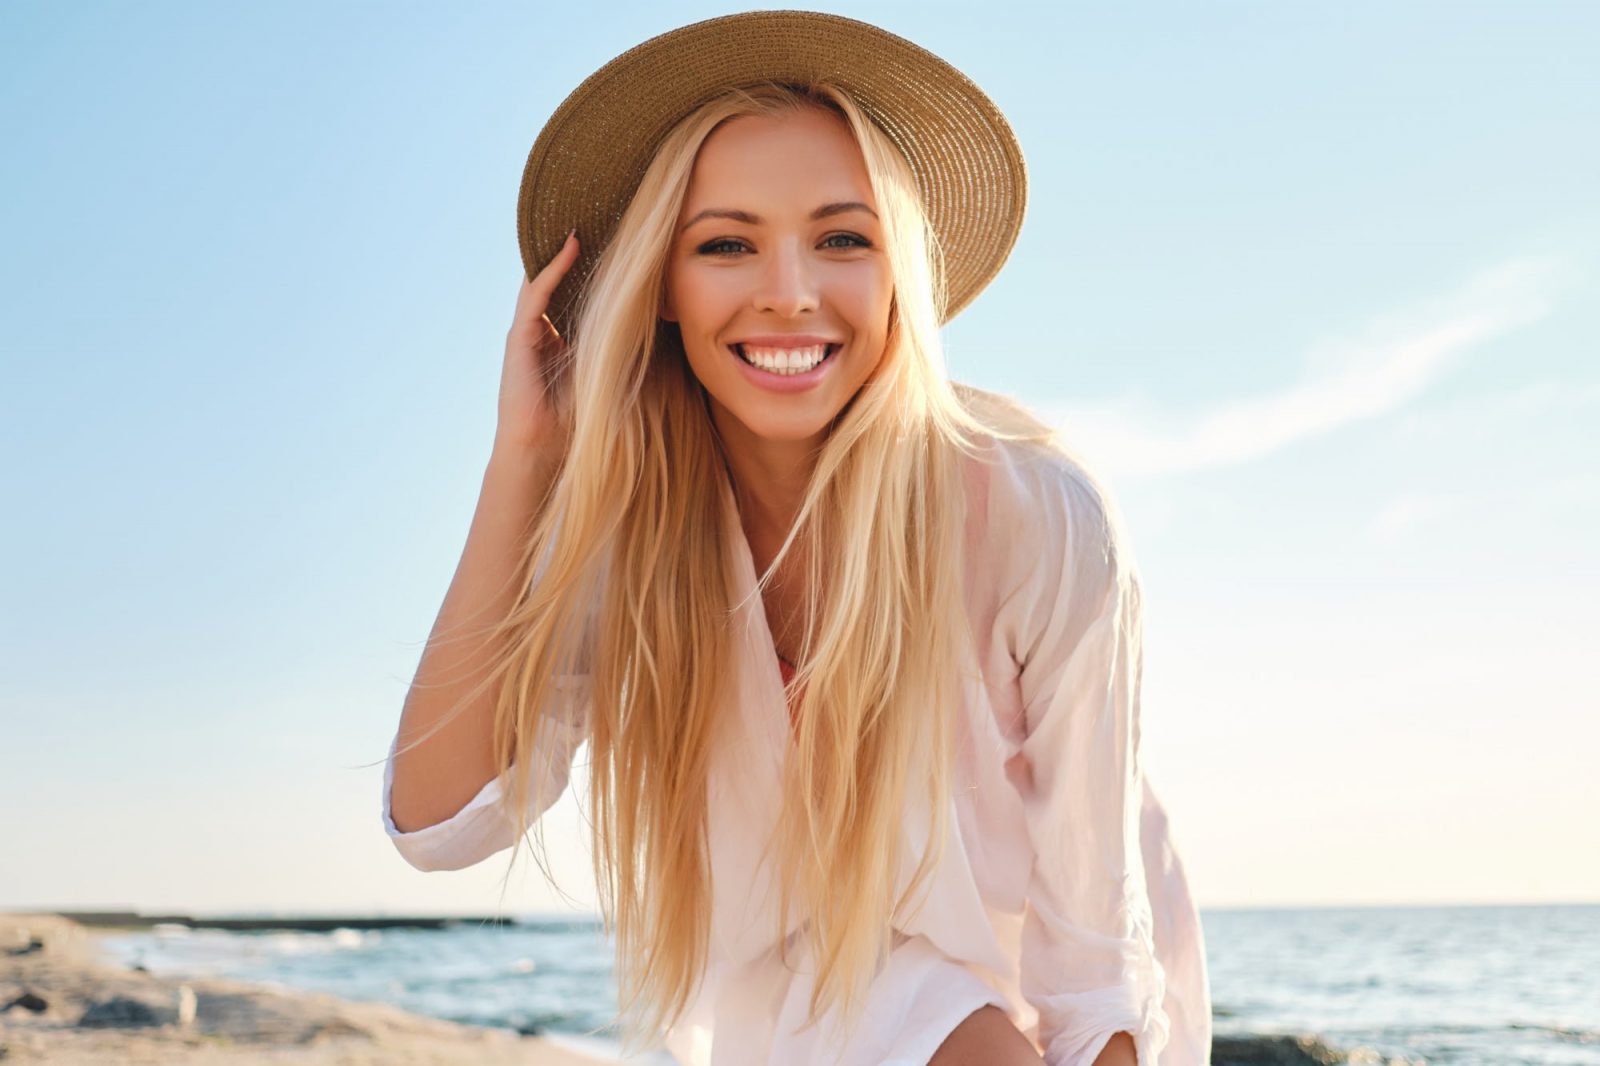 Top cosmetic treatment picks you can still do in the summer!